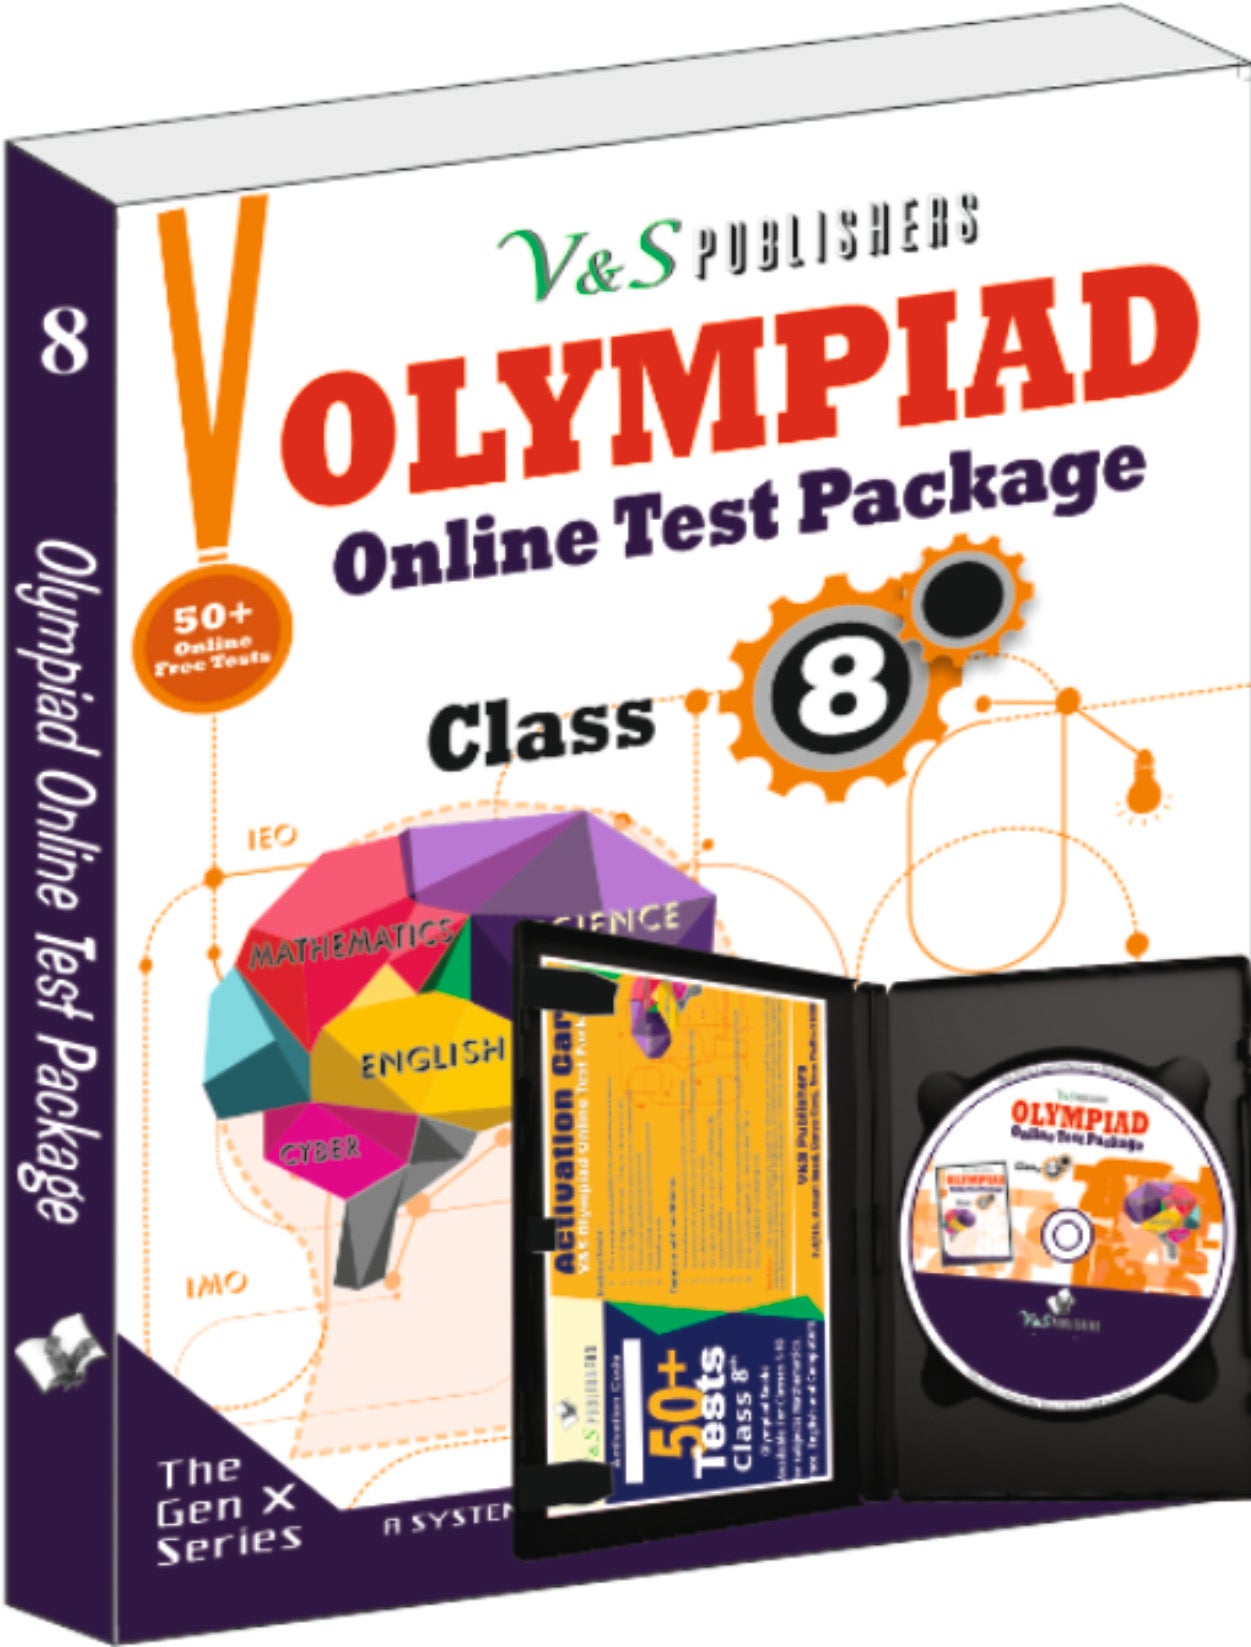 Olympiad Online Test Package Class 8 (Free CD With Activation Voucher)